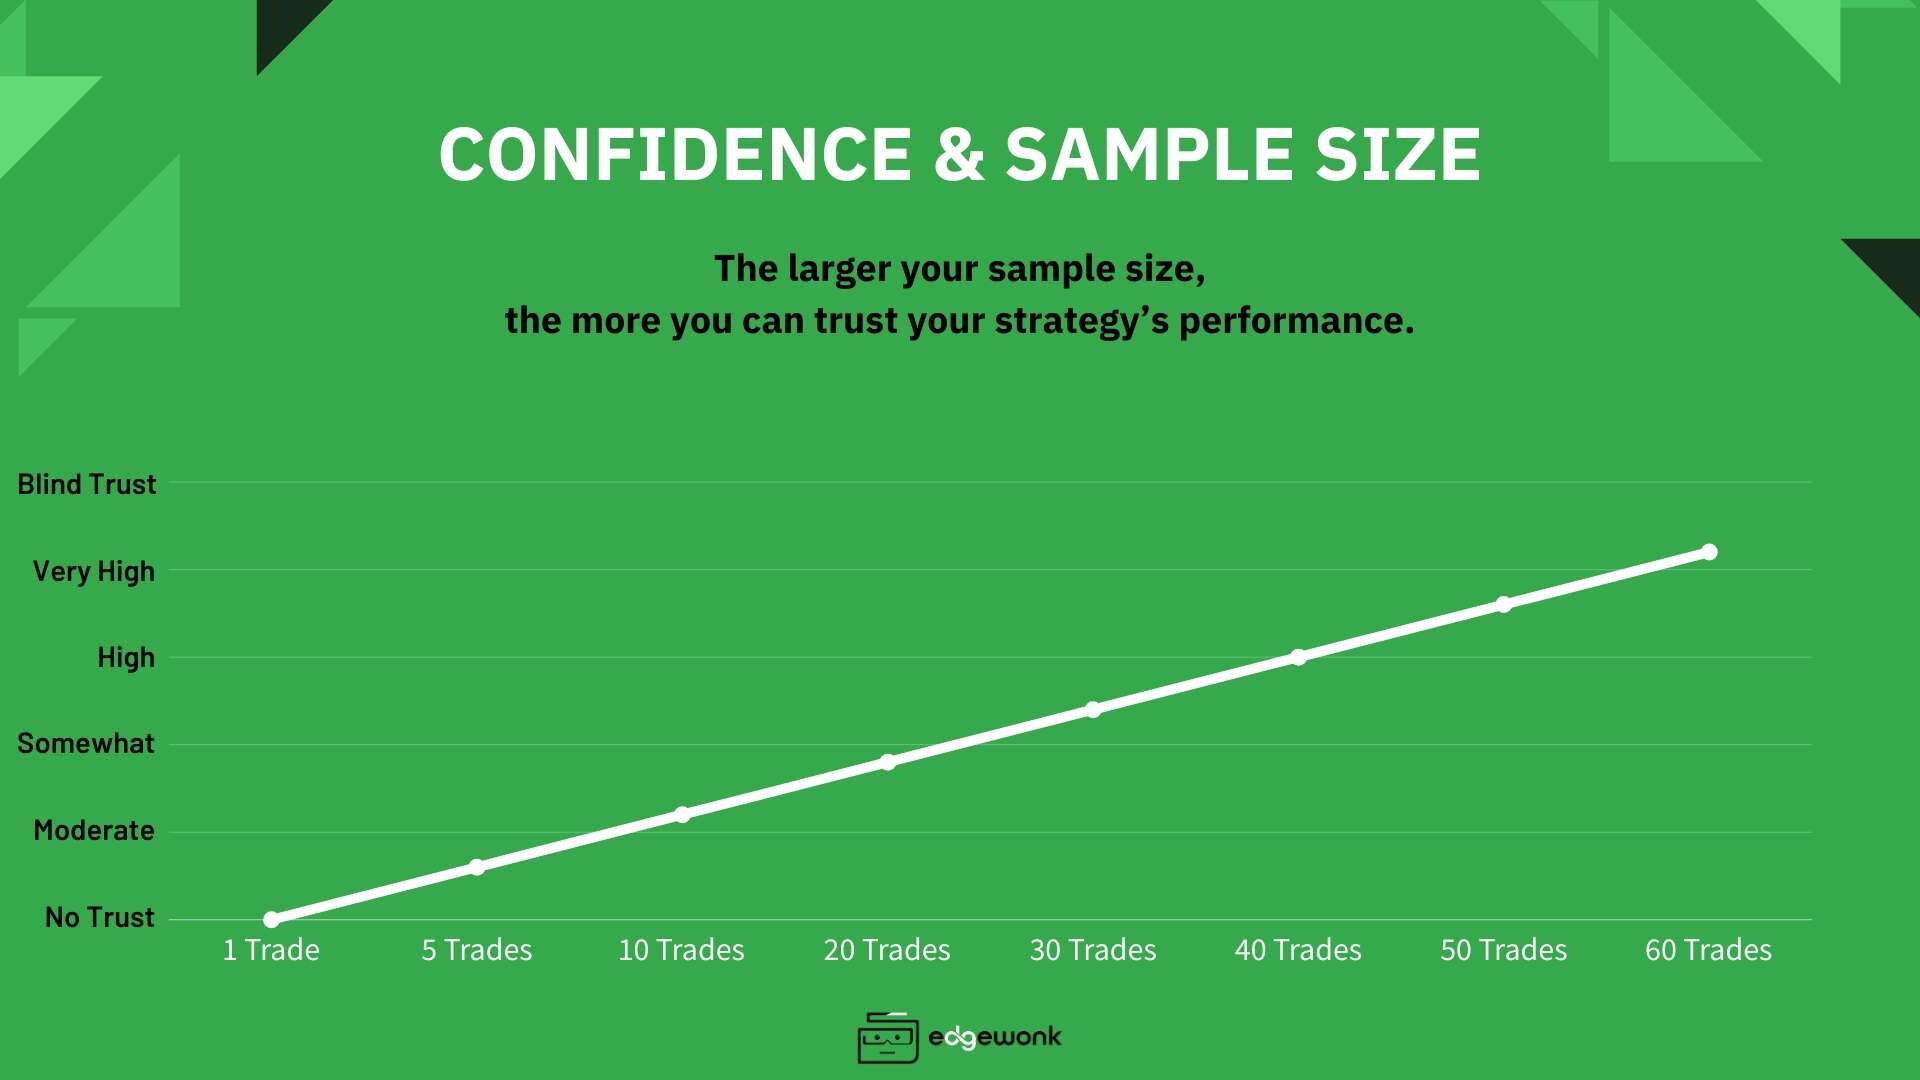 Confidence & Sample Size